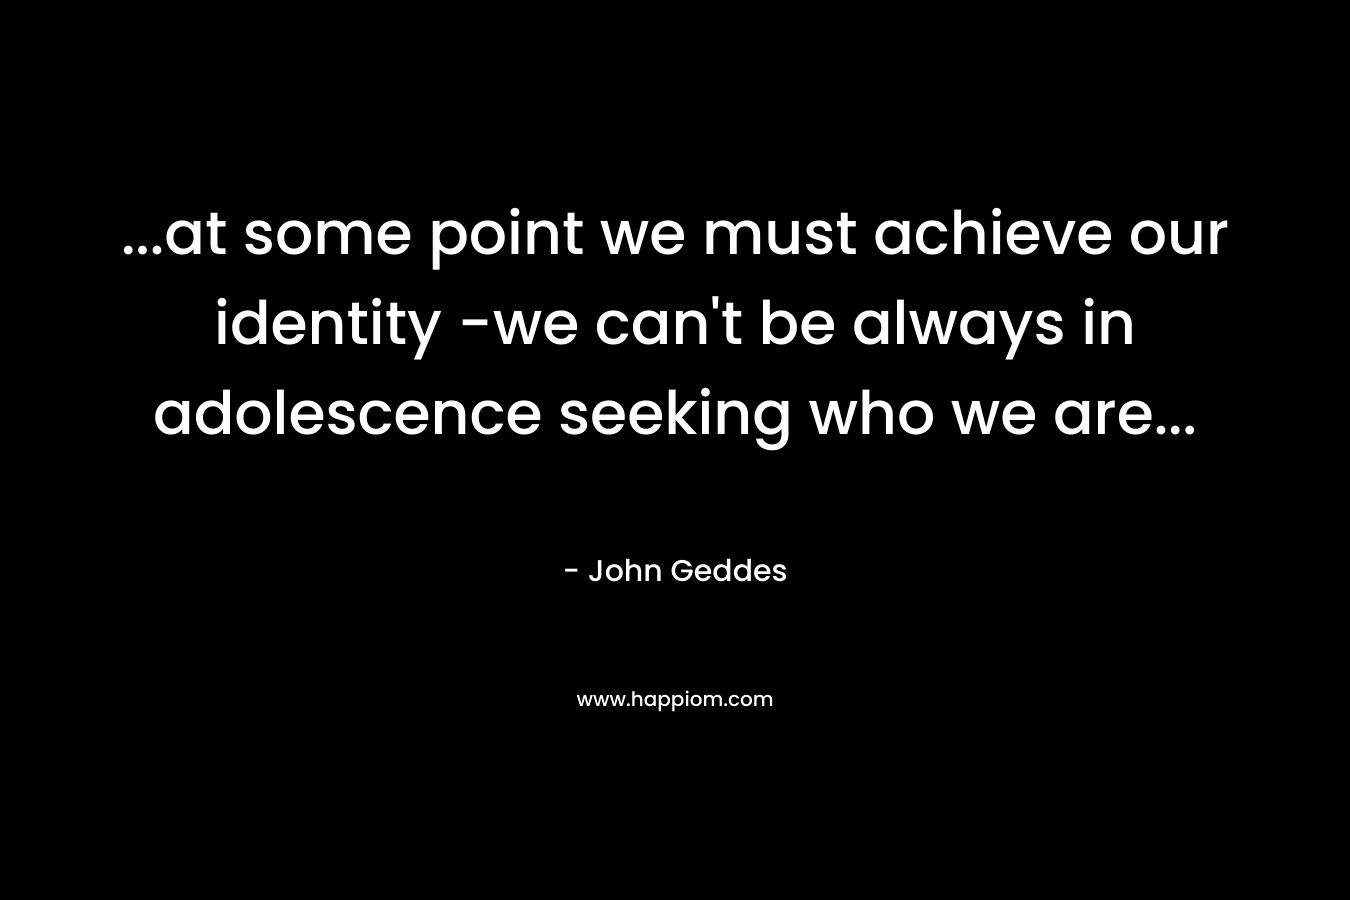 …at some point we must achieve our identity -we can’t be always in adolescence seeking who we are… – John Geddes